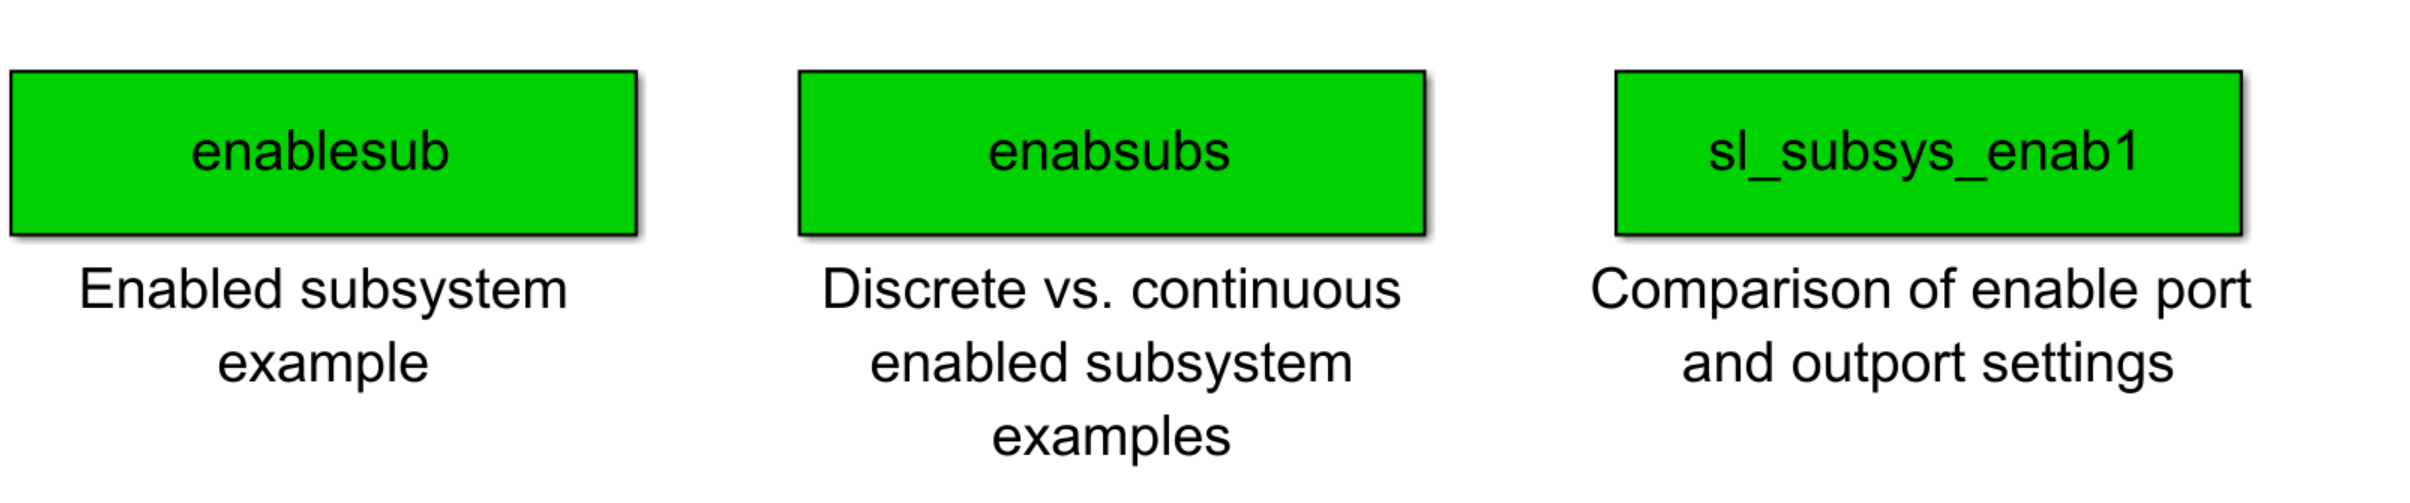 Enabled Subsystem examples